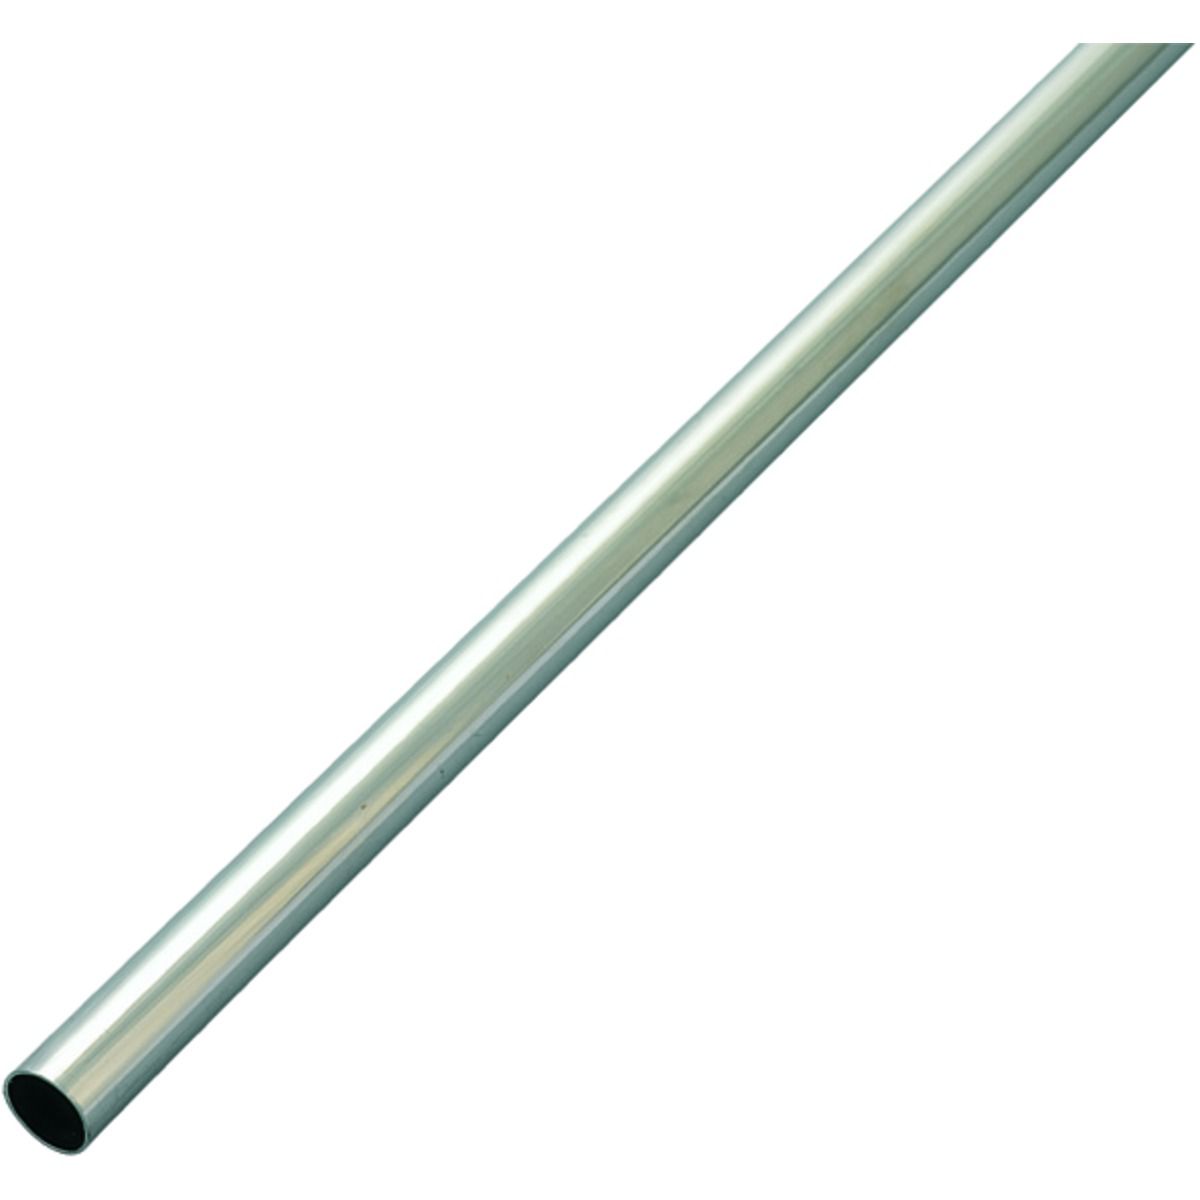 Image of Wednesbury Copper Pipe Chrome Plate - 15mm x 2m